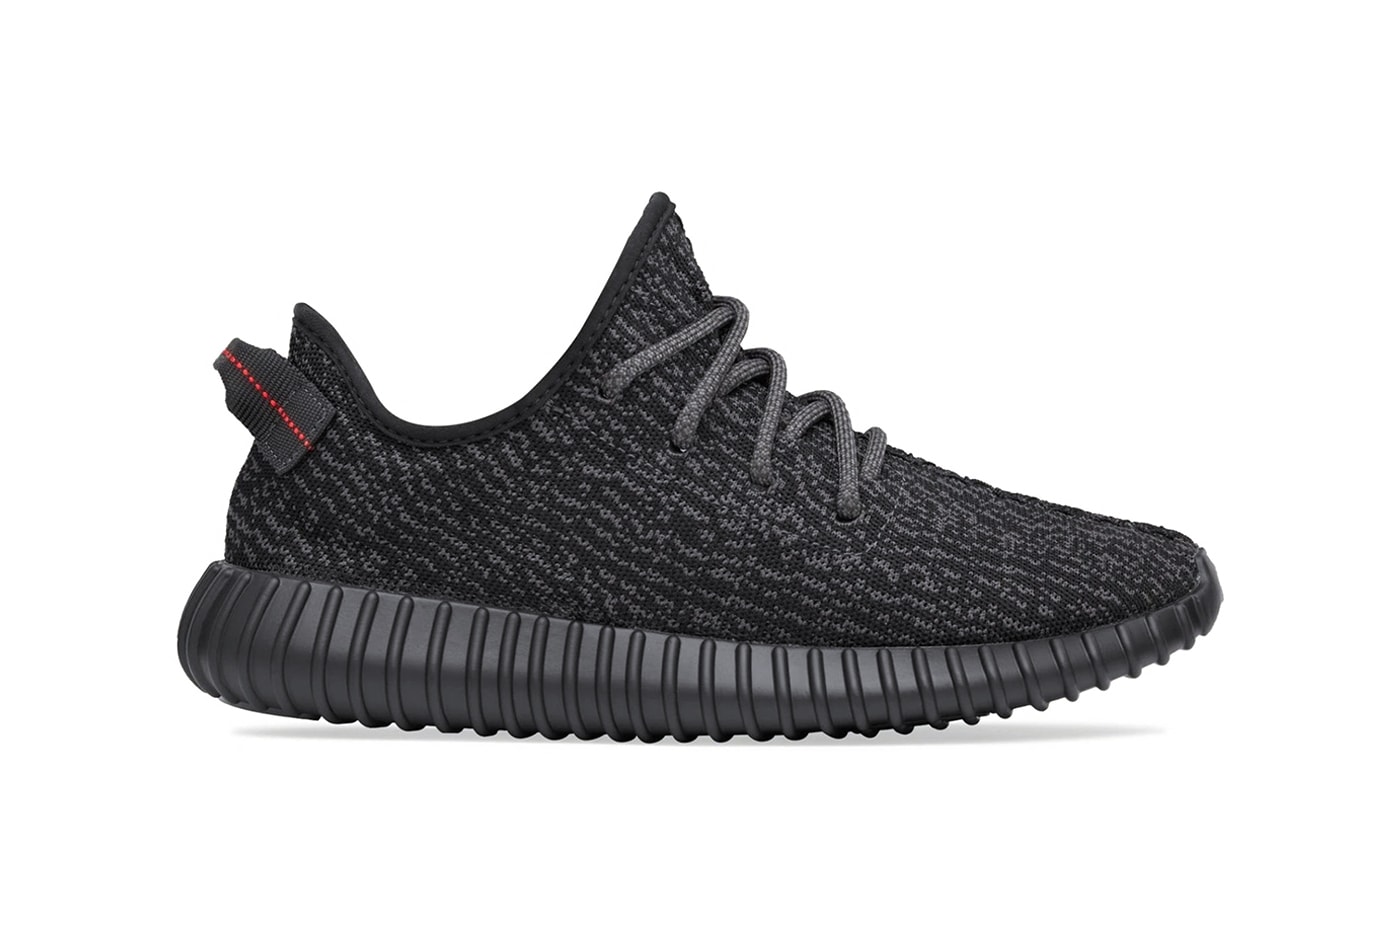 adidas Yeezy boost 350 pirate black august 2015 release date info price OG